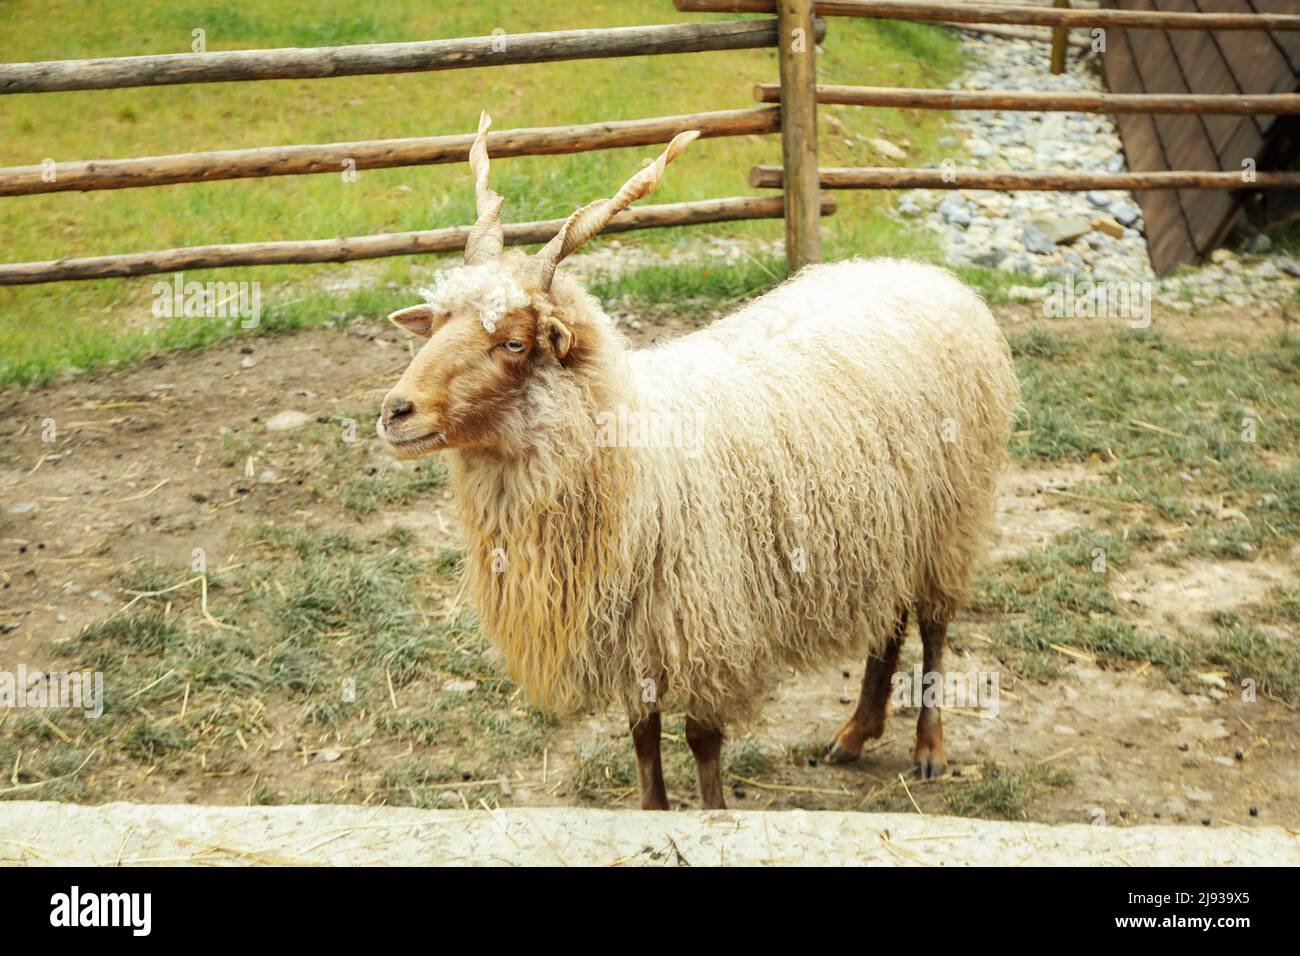 Sheep with spiral horns or Racka sheep Stock Photo